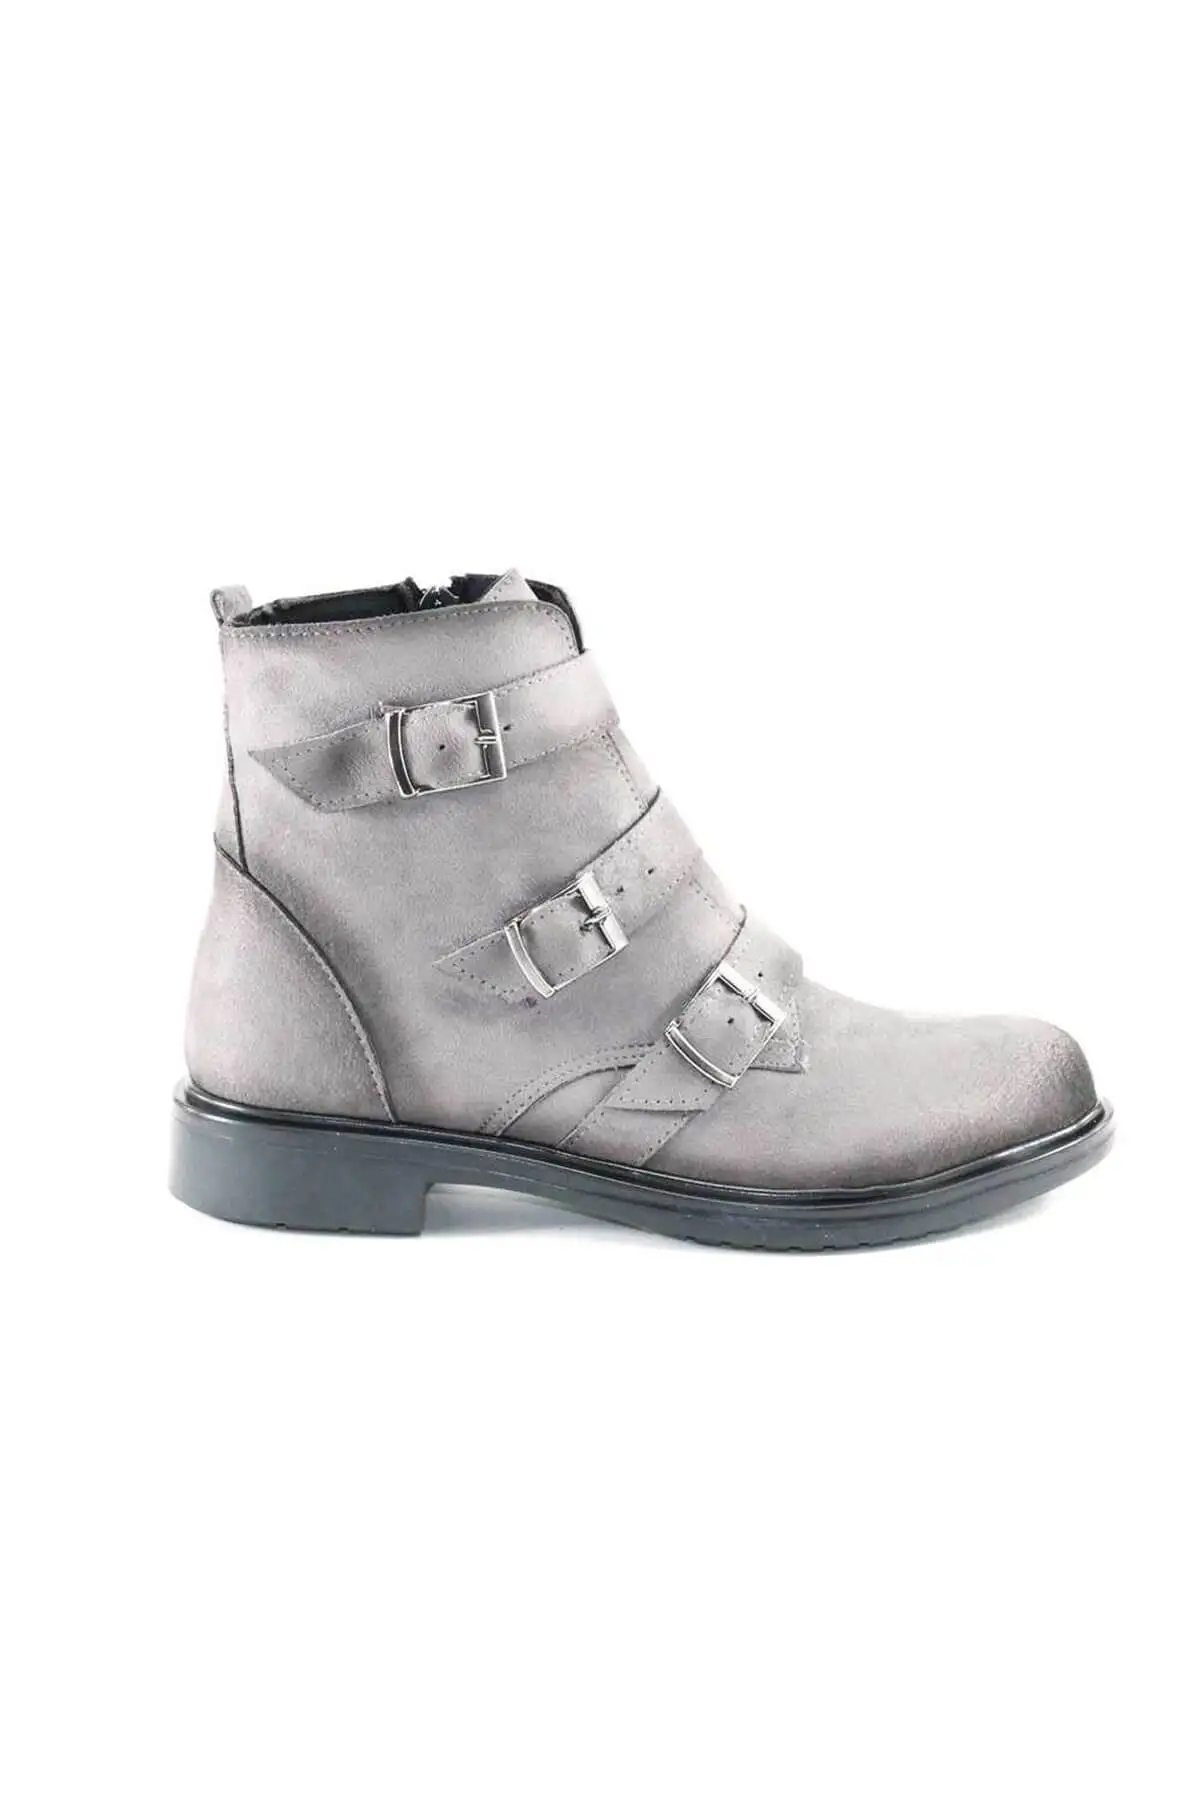 

Modabuymus Ankle Height Boot